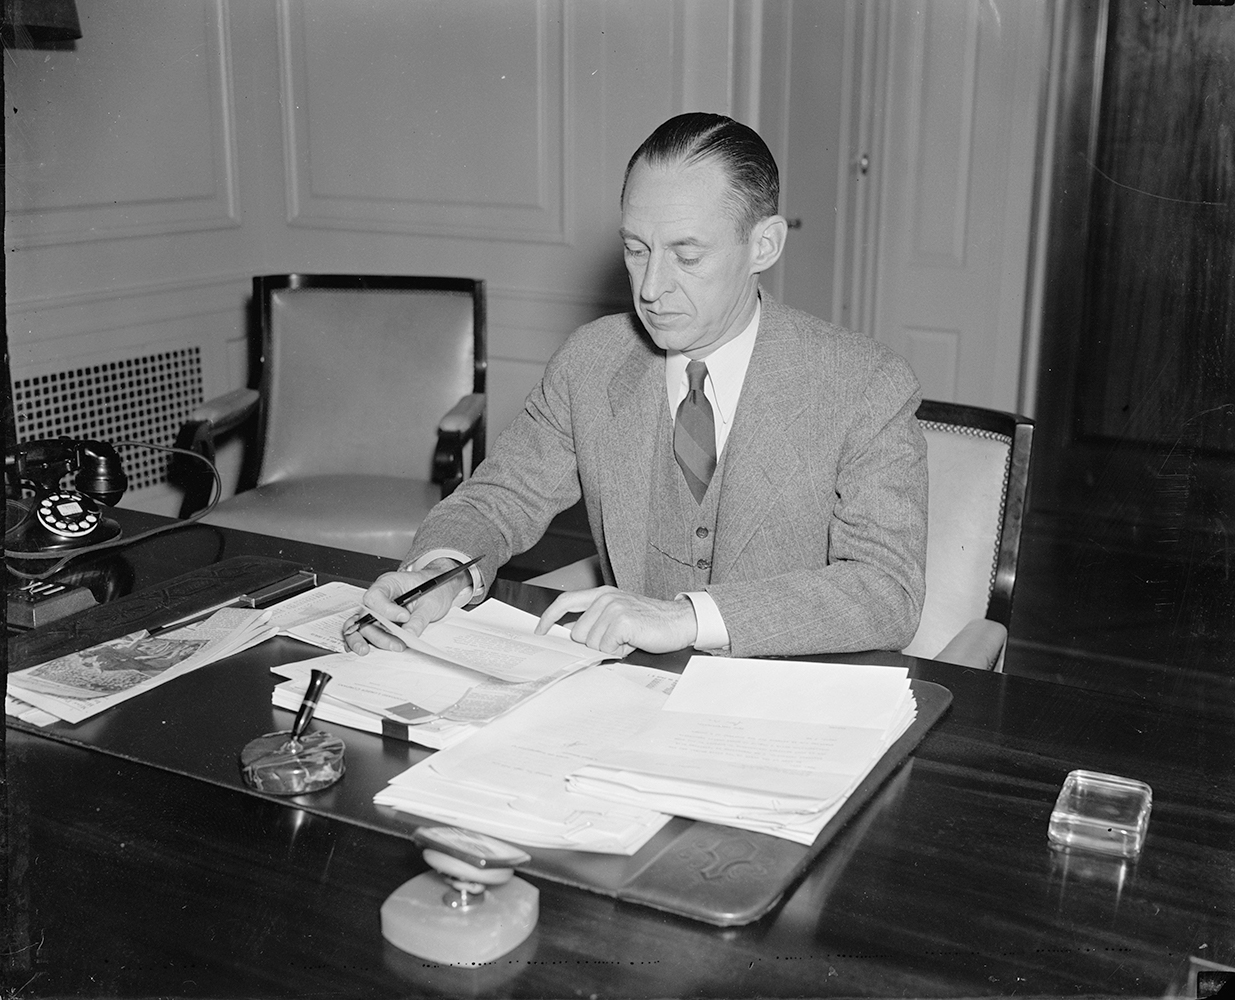 A man in a grey suit and stripped tie sits at a desk signing a large pile of papers with an ink pen. Also visible on the desk is a rotary phone and several paperweights. Image link will enlarge image.